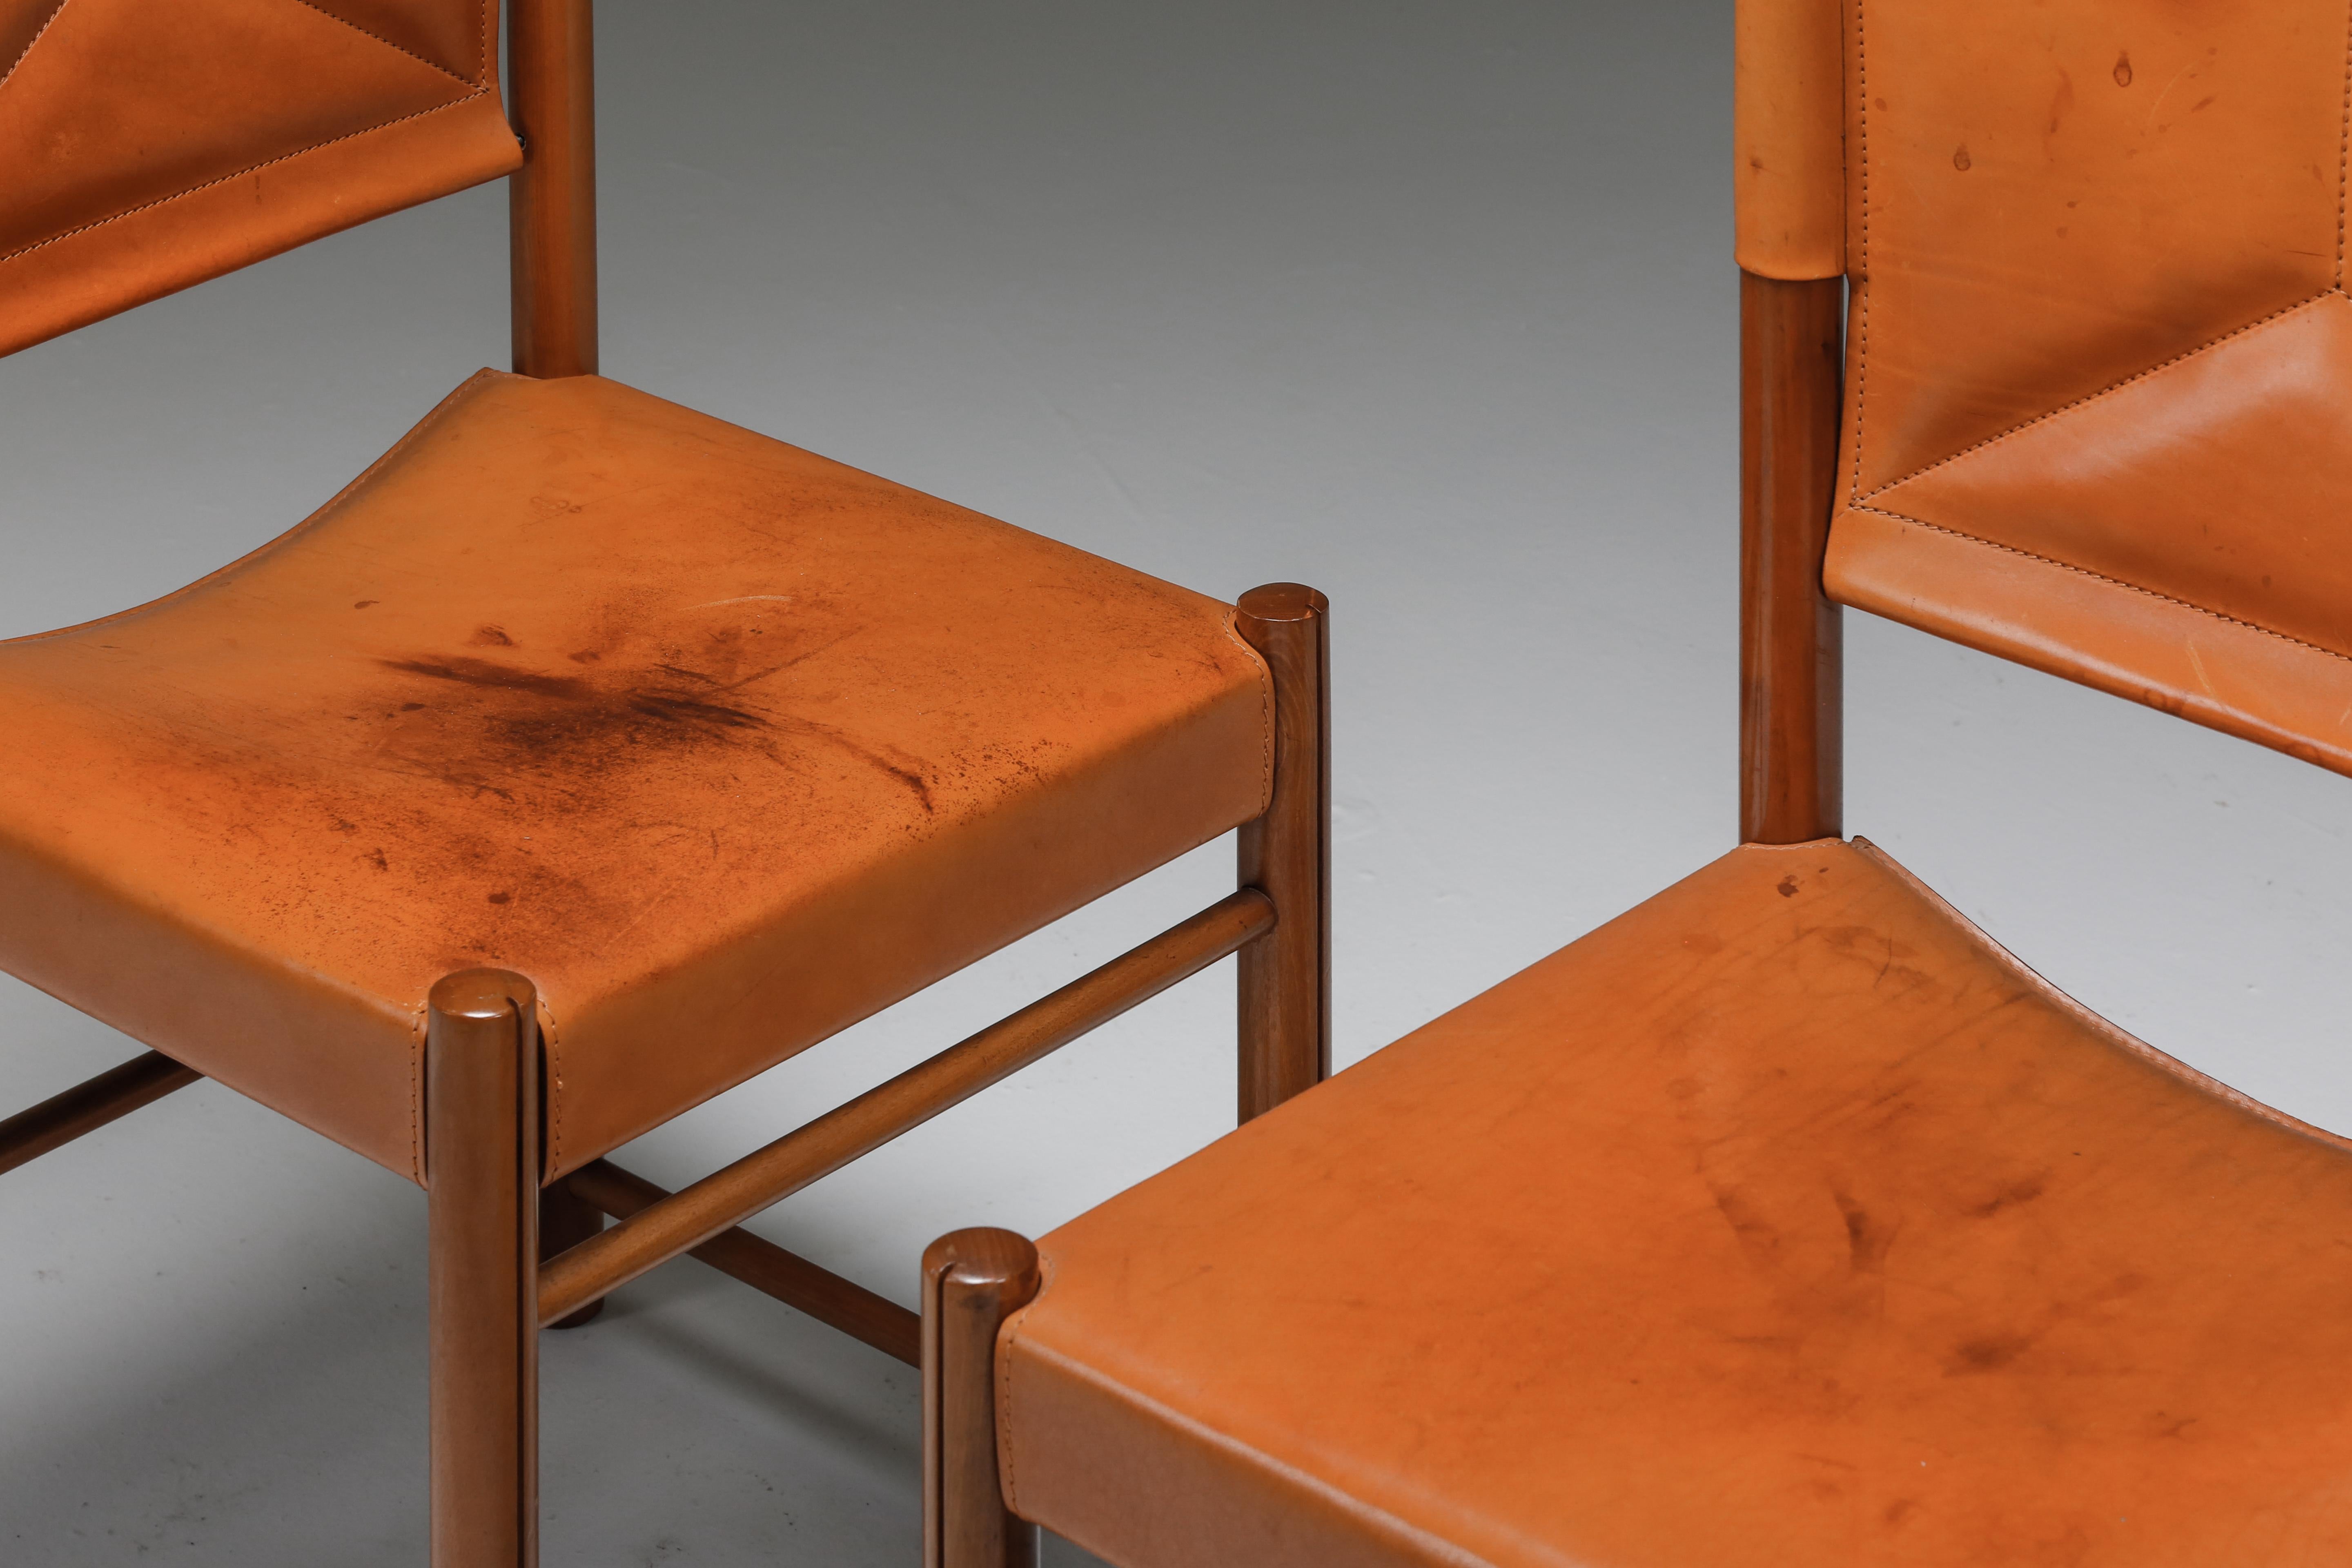 Cognac leather chairs, attributed to Carlo Scarpa, Italy, 1960s

Cognac leather chairs, attributed to Carlo Scarpa, made in Italy, 1960s. Carlo Scarpa attributed dining chairs in beautifully aged natural saddle leather, and a solid walnut frame.